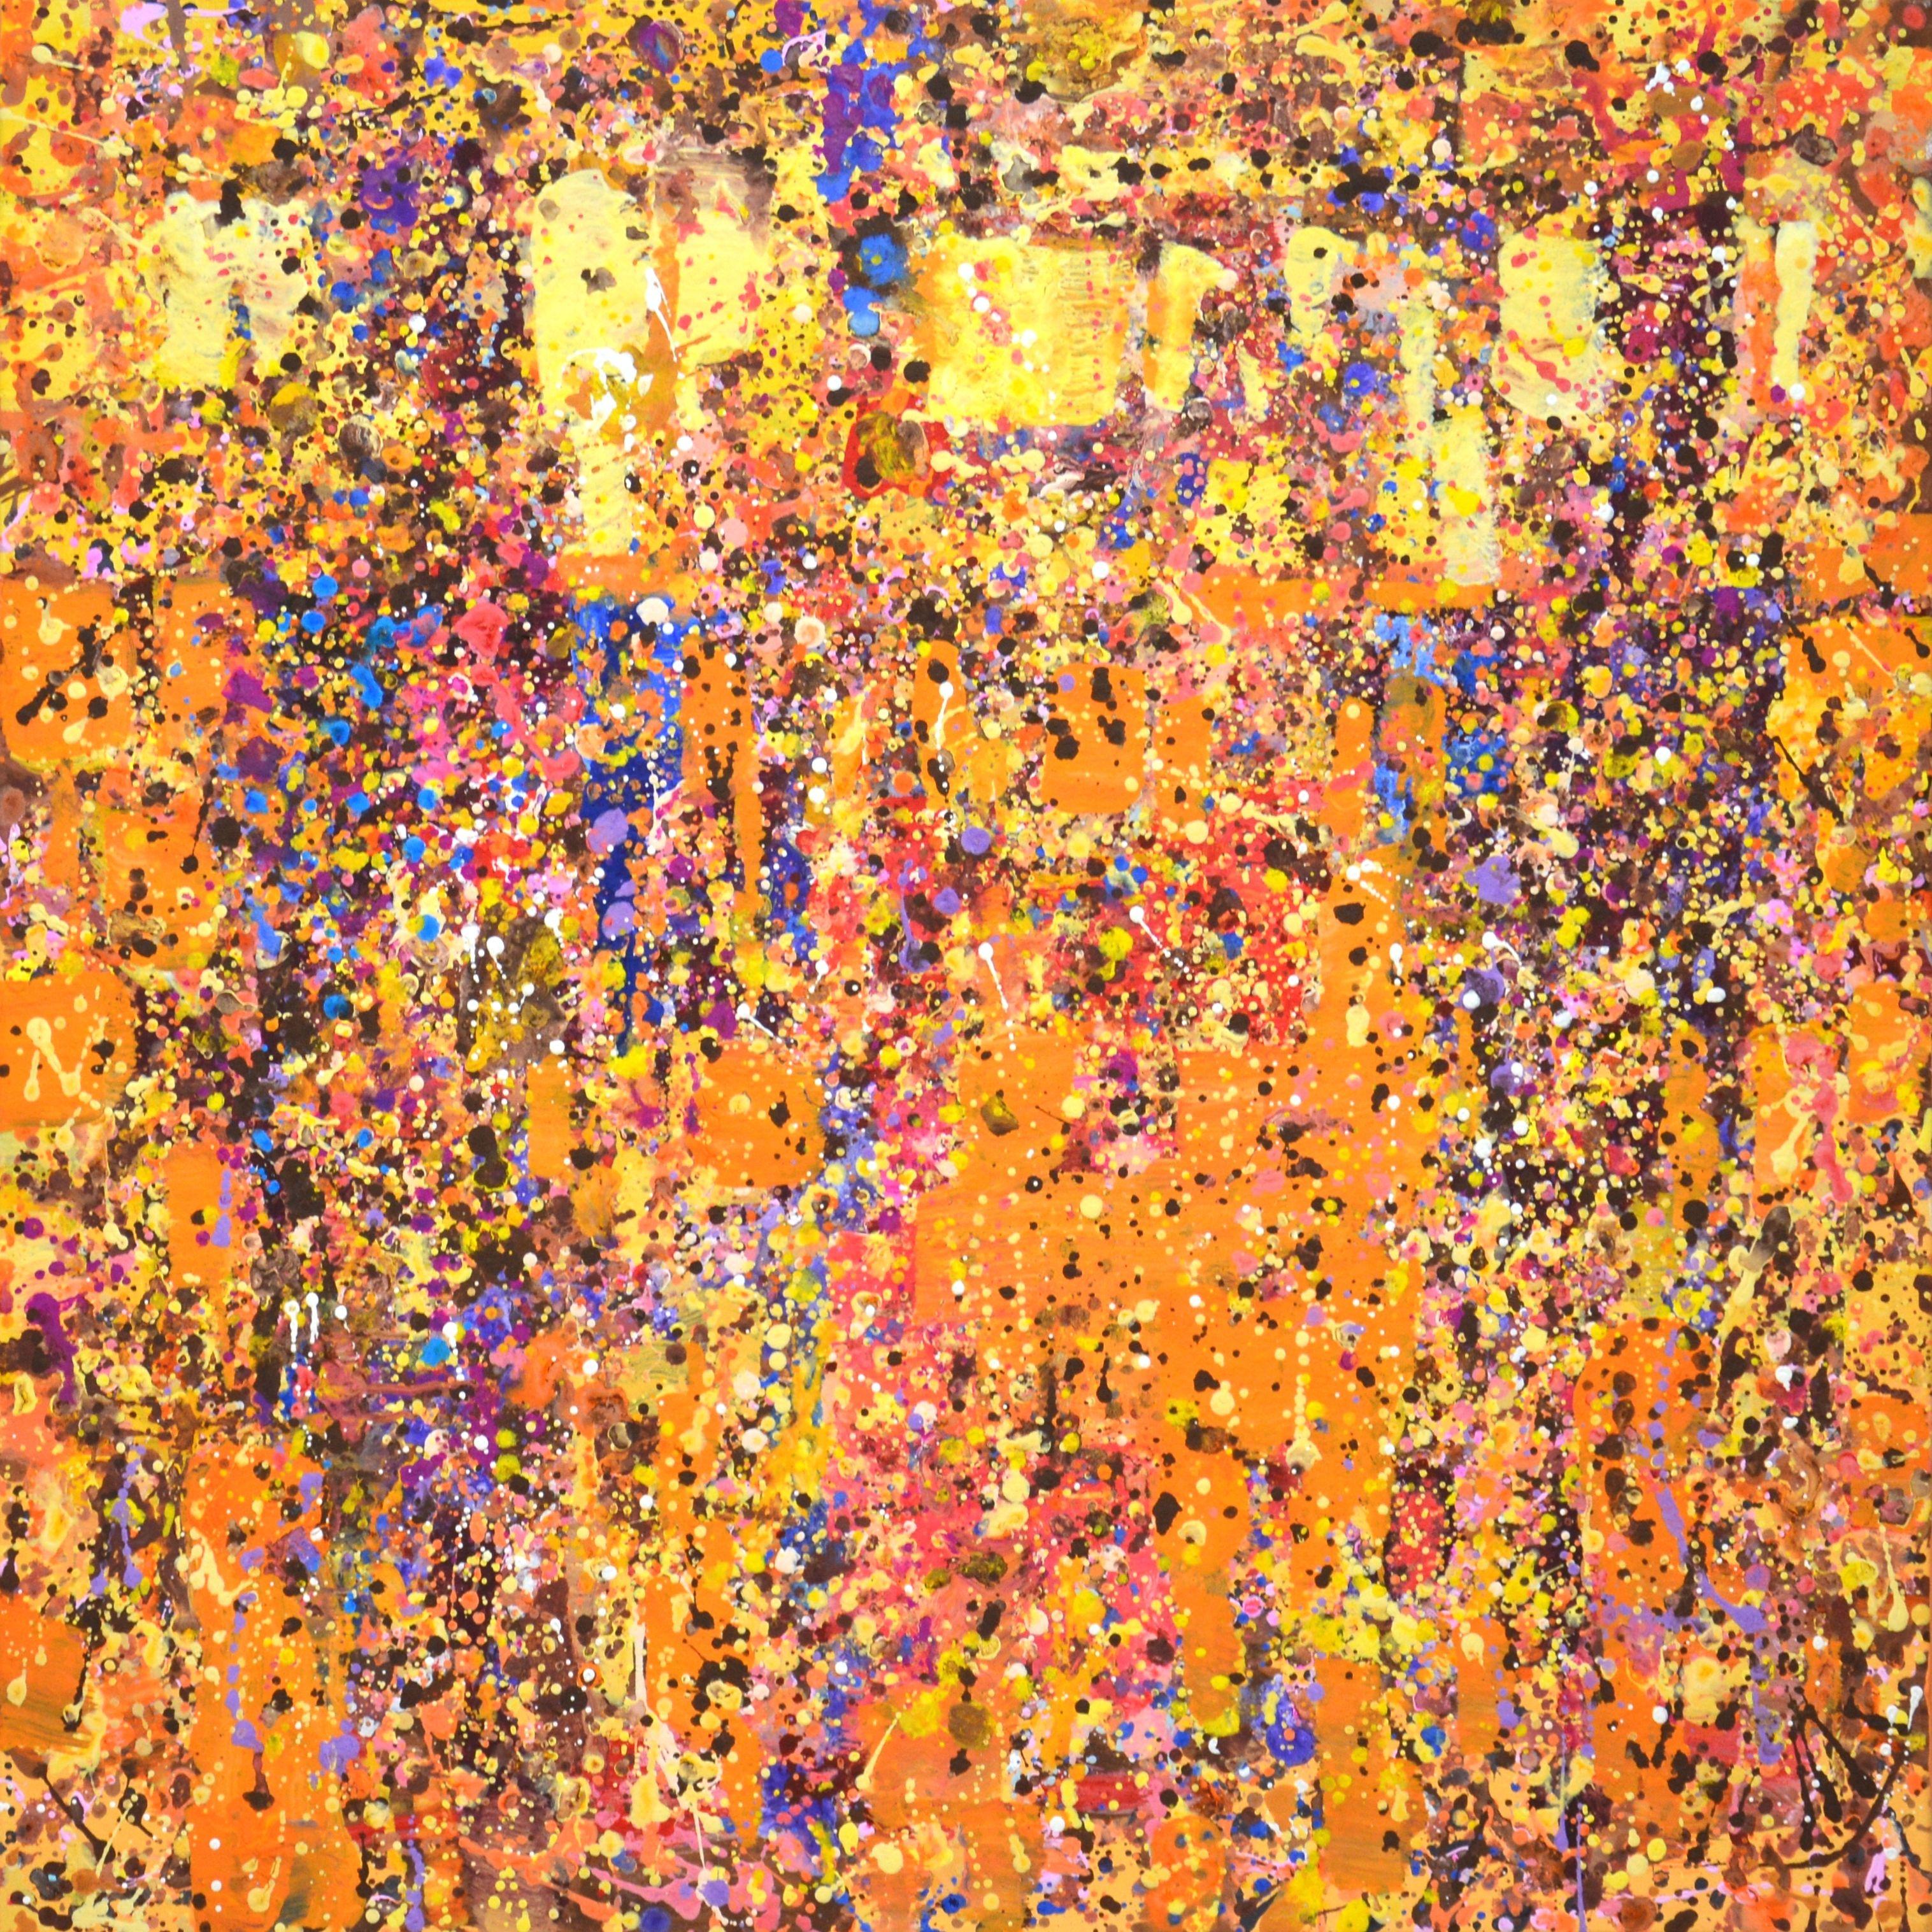 The story of one day. An expressive, modern, abstract painting created by drops and splashes of paint that sparkles and shimmers! The colors are superimposed on each other and also correspond to different points. Many colored drops, yellow, orange,